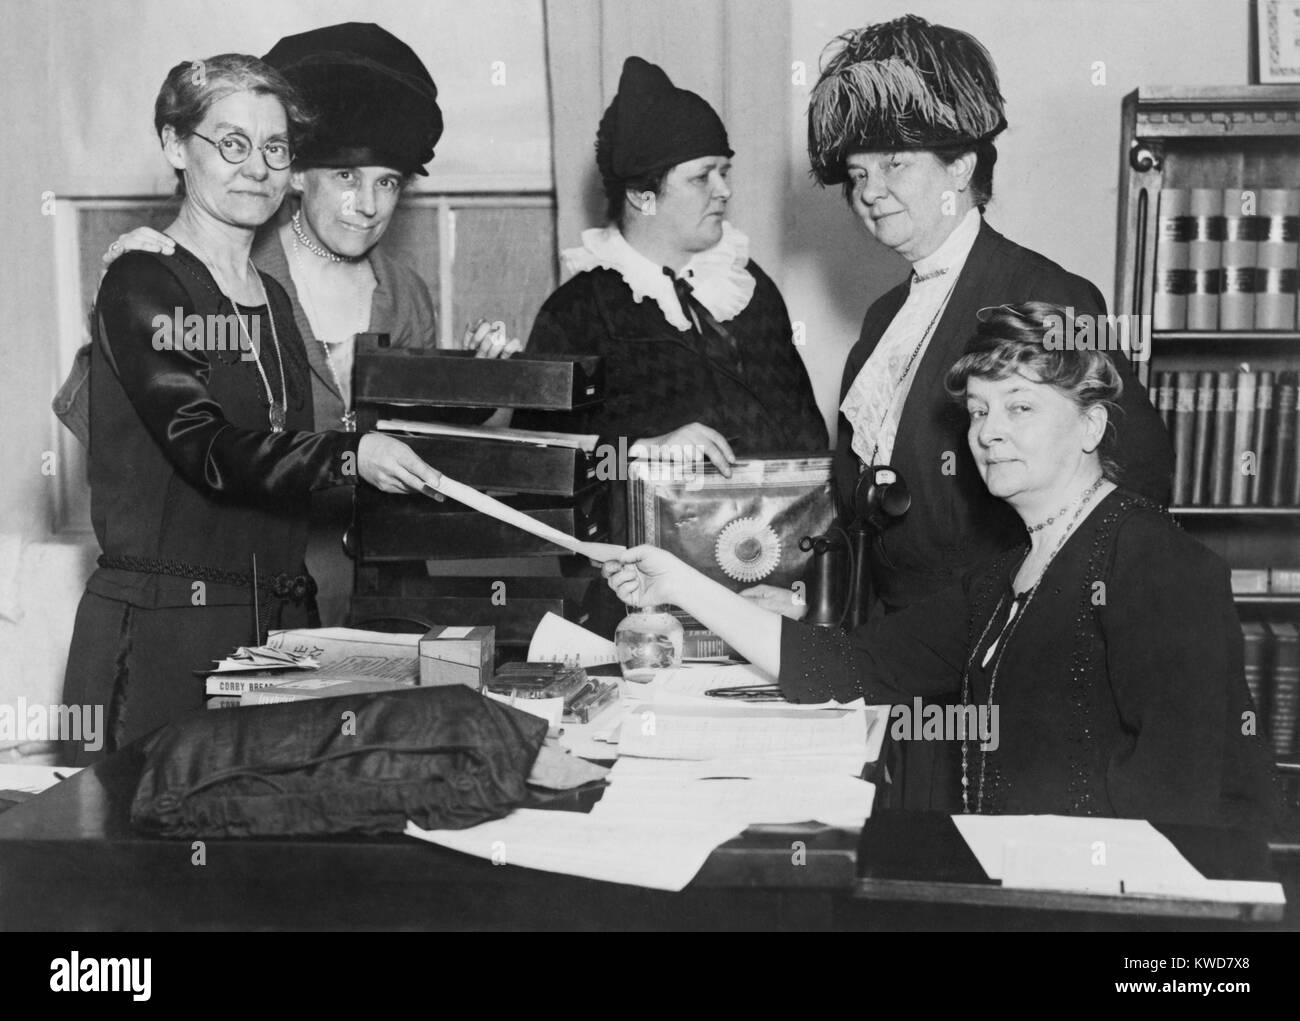 Executive committee of the National League of Women Voters in 1924. L-R: Elizabeth Hauser, Katherine Ludington, Ruth Morgan, Belle Sherwin, and Maud Wood Park. Later renamed 'League of Women Voters', it was founded in 1920 by Carrie Chapman Catt to help newly enfranchised women exercise their responsibilities as voters. (BSLOC 2015 16 193) Stock Photo